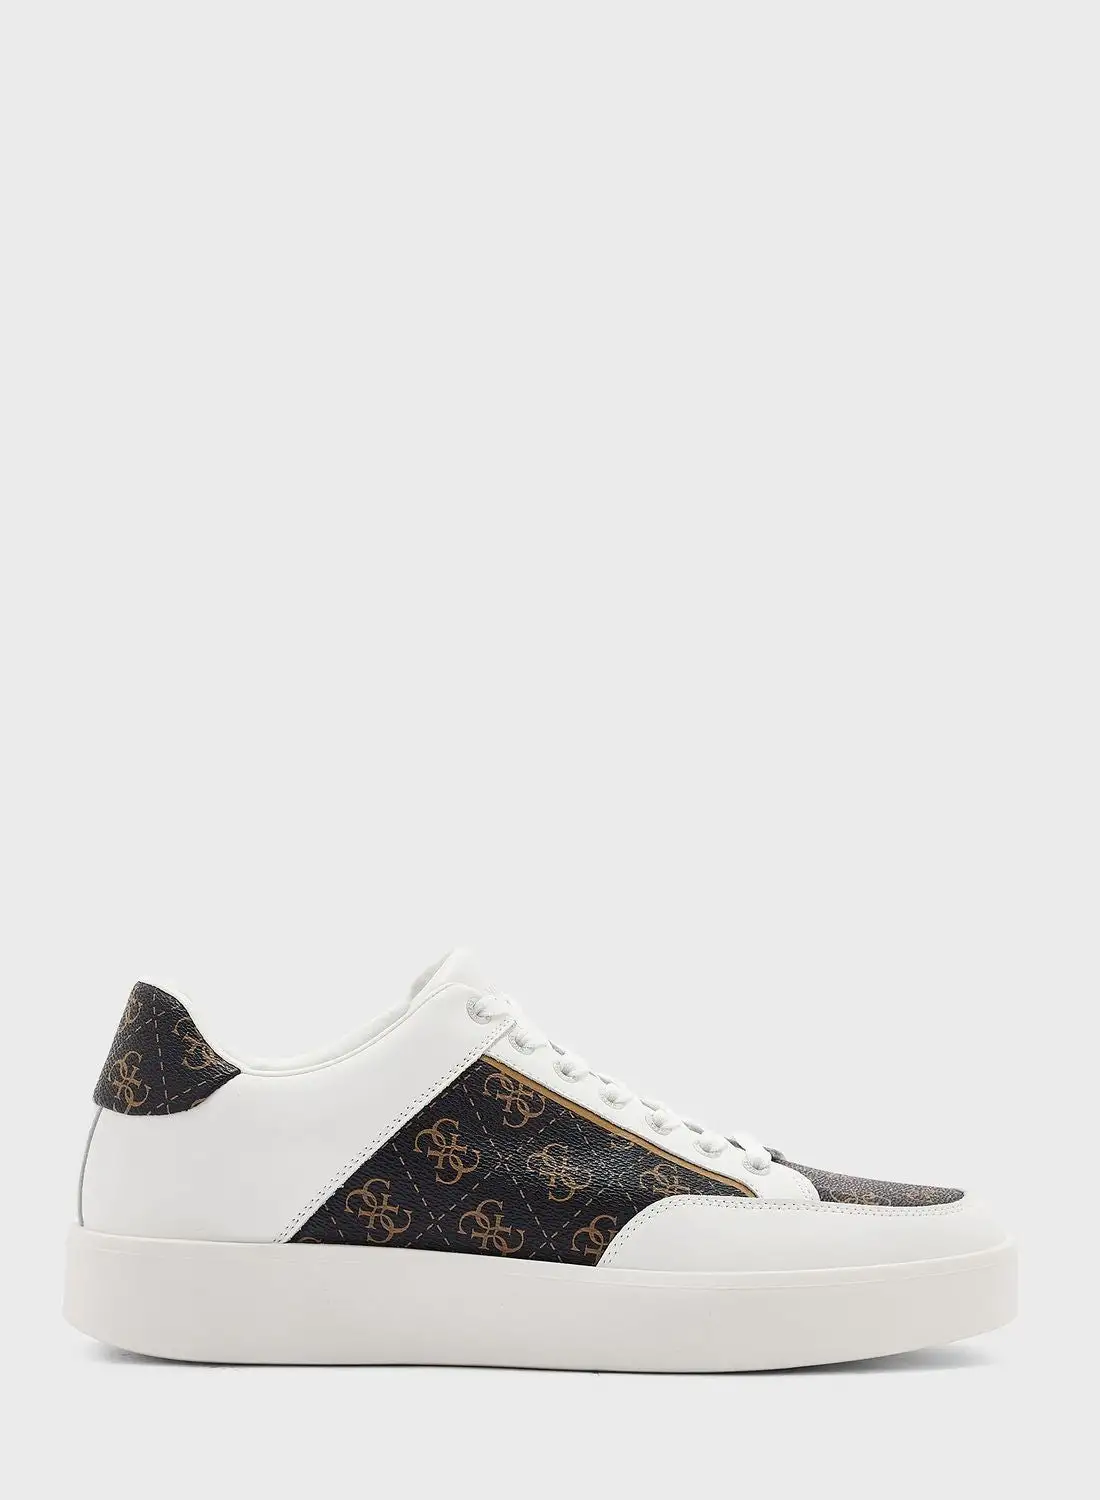 GUESS Casual Low Top Sneakers